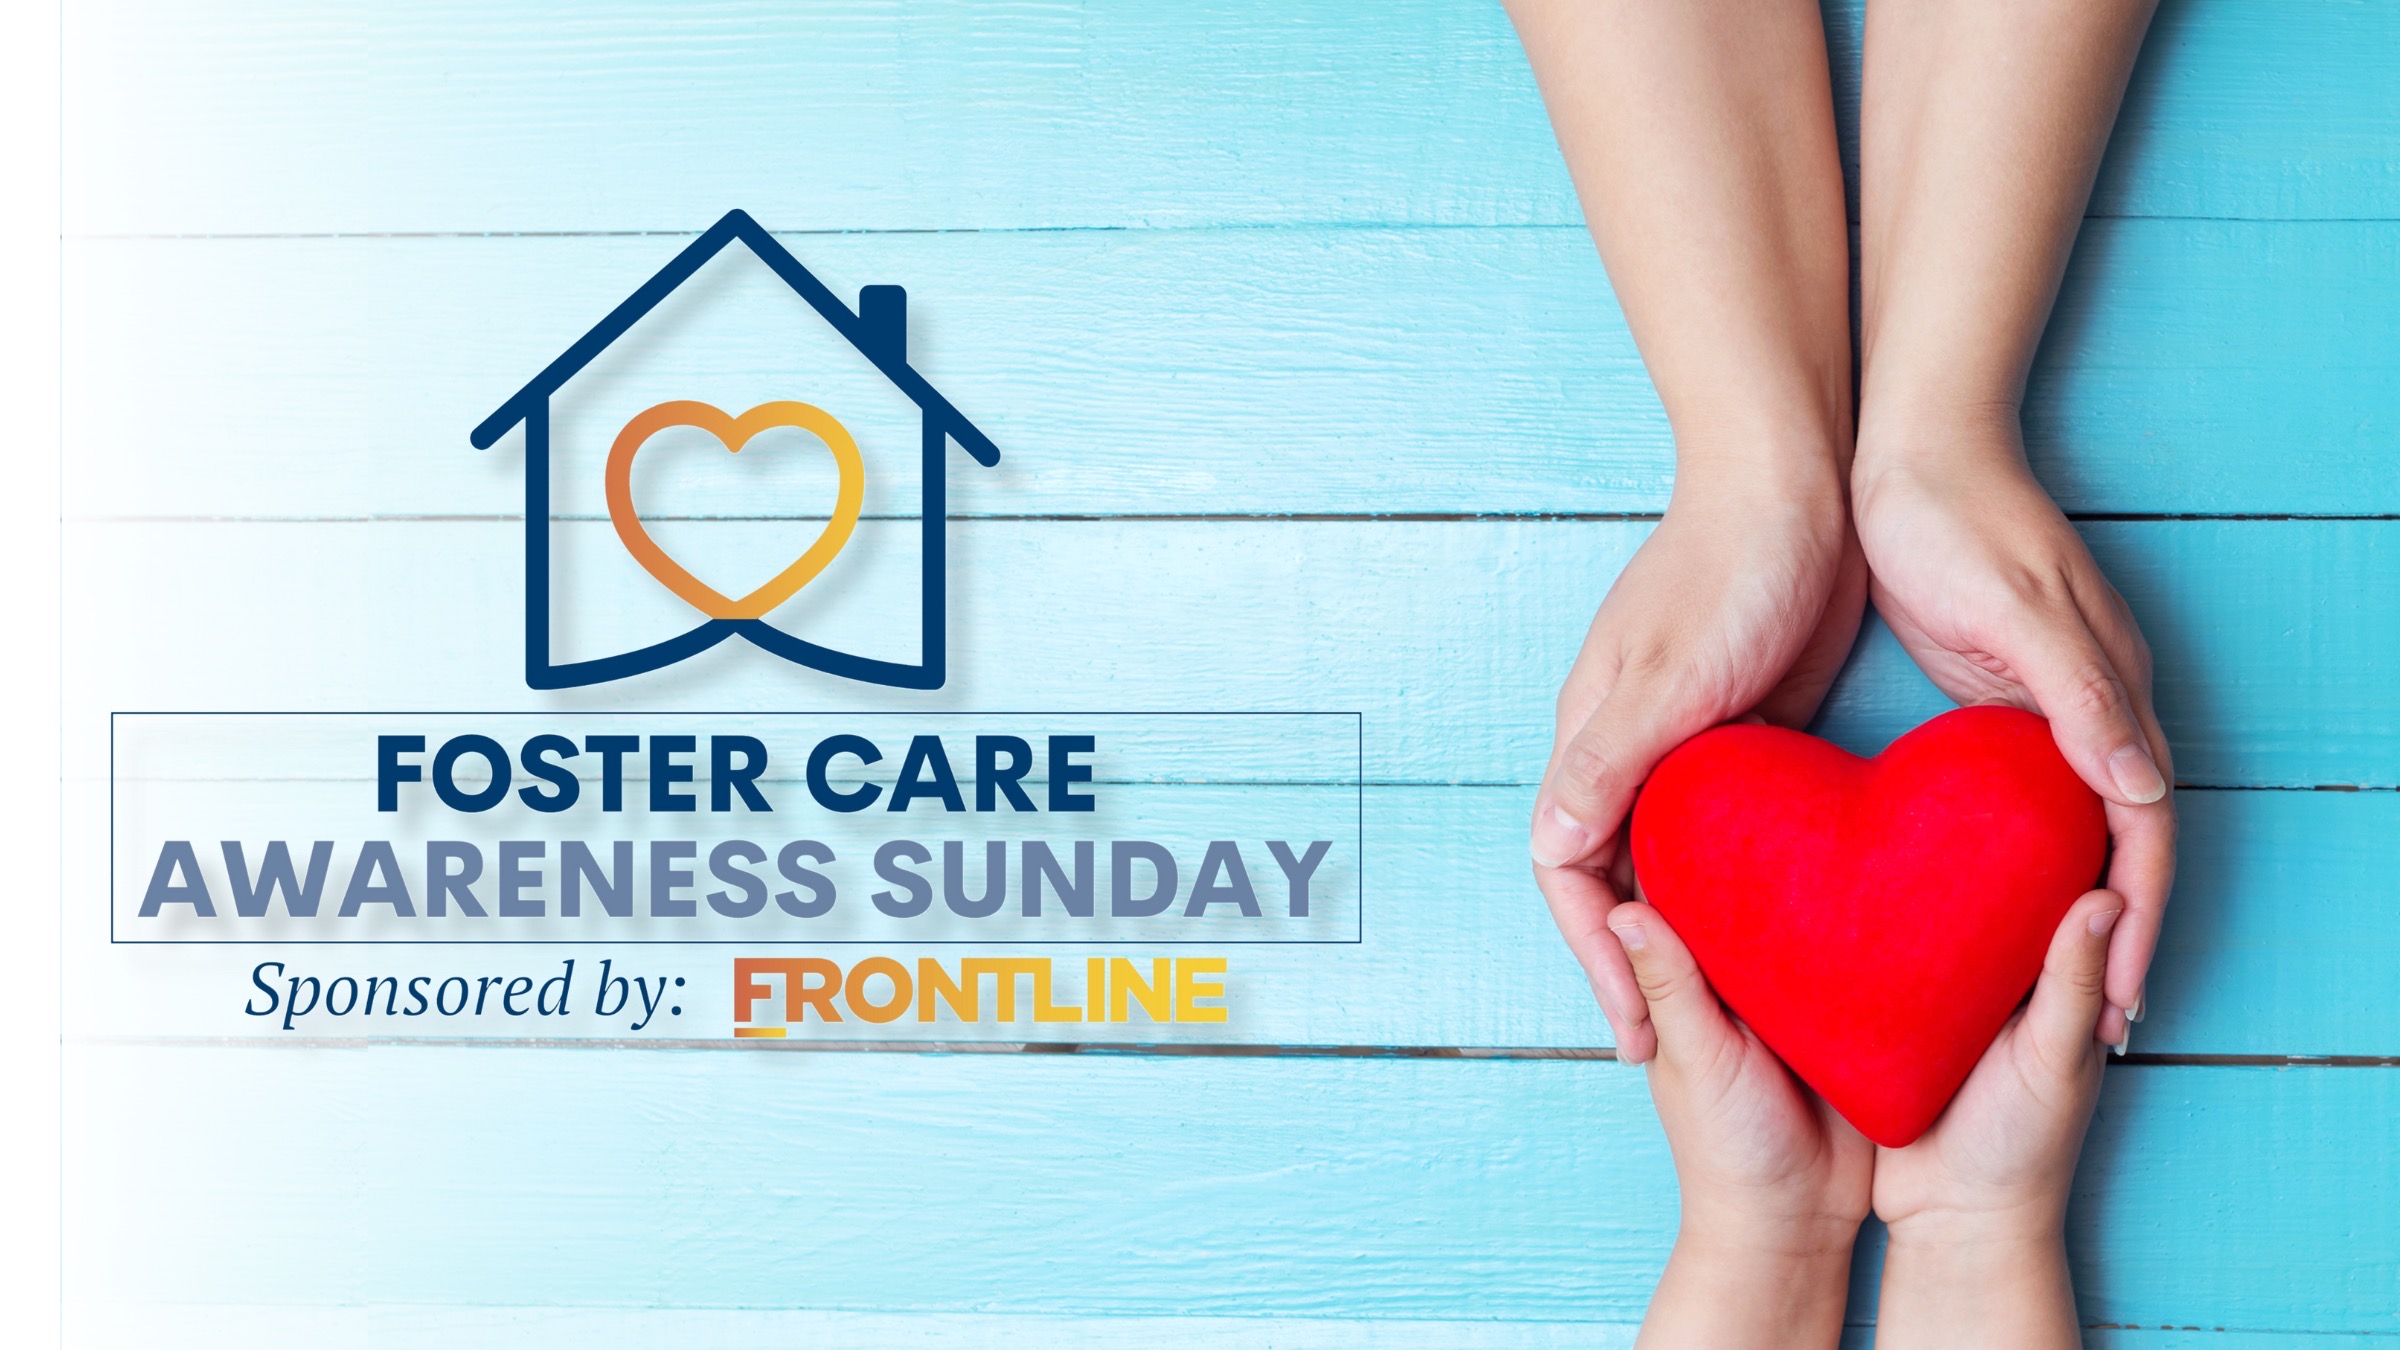 CHILDREN IN FOSTER CARE NEED YOUR CHURCH’S HELP